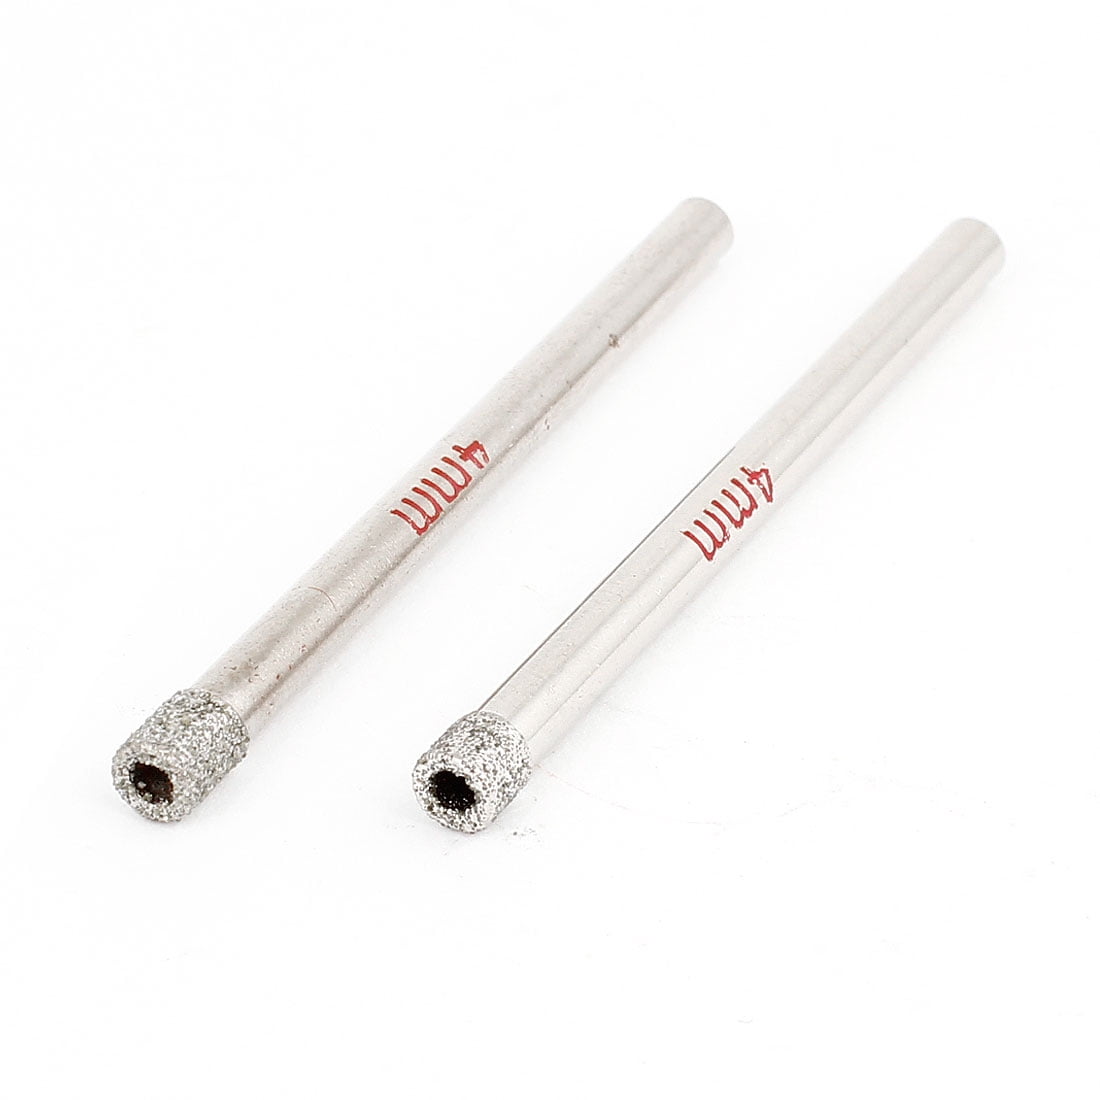 PROFESSIONAL 2PCS 4MM DIAMOND COATED DRILL BIT CUTTER SAW CORE GLASS MARBLE TILE 